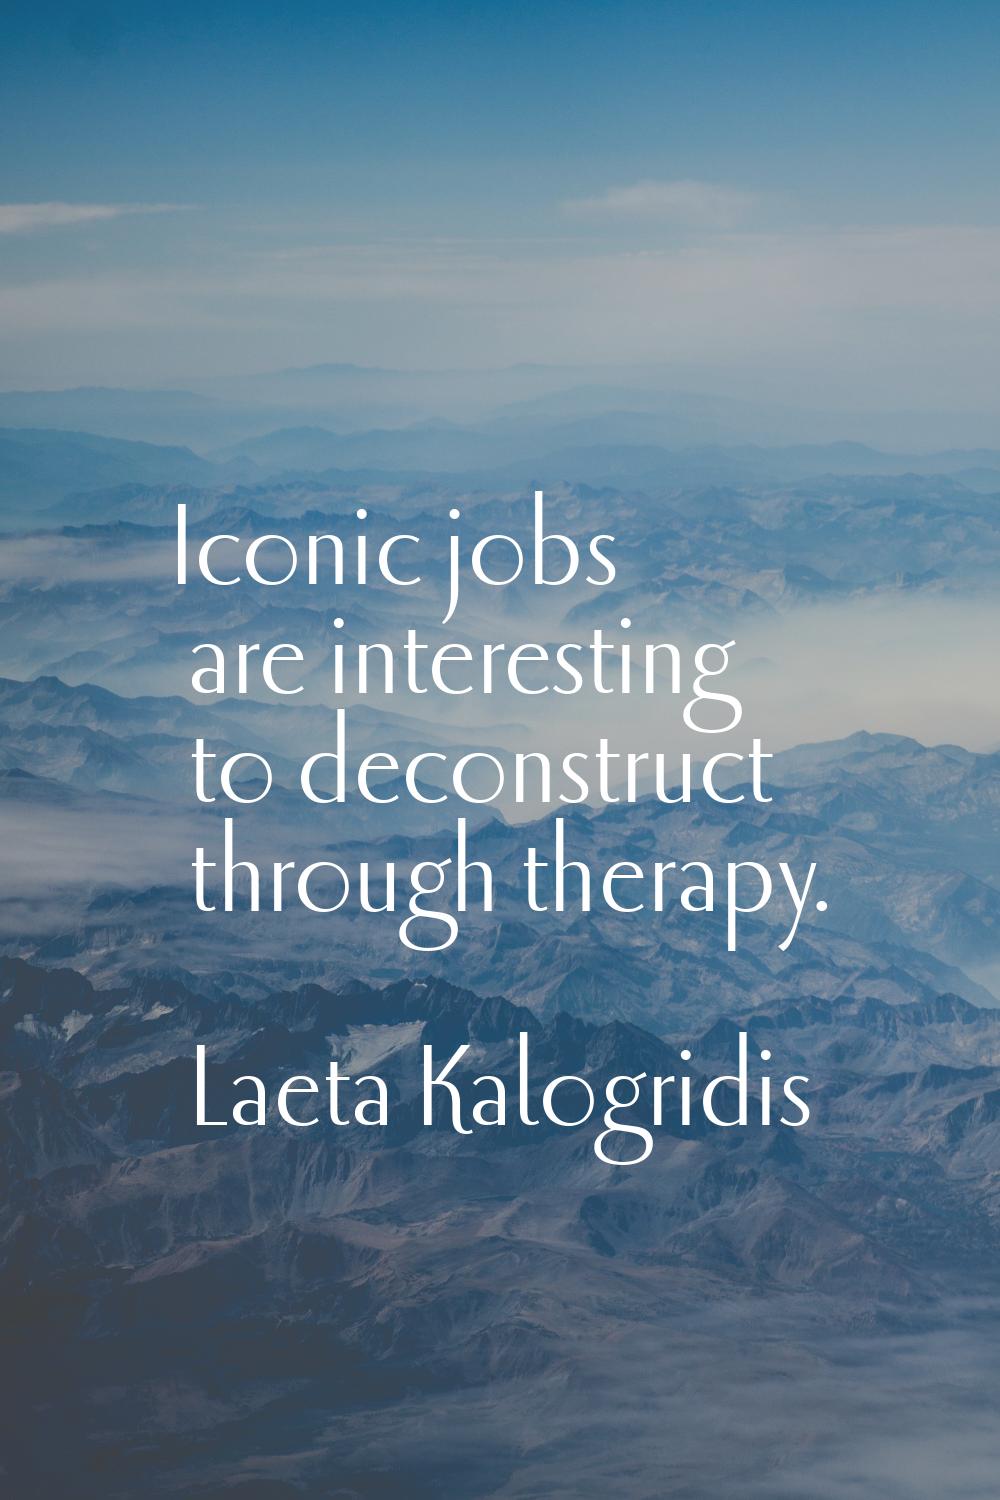 Iconic jobs are interesting to deconstruct through therapy.